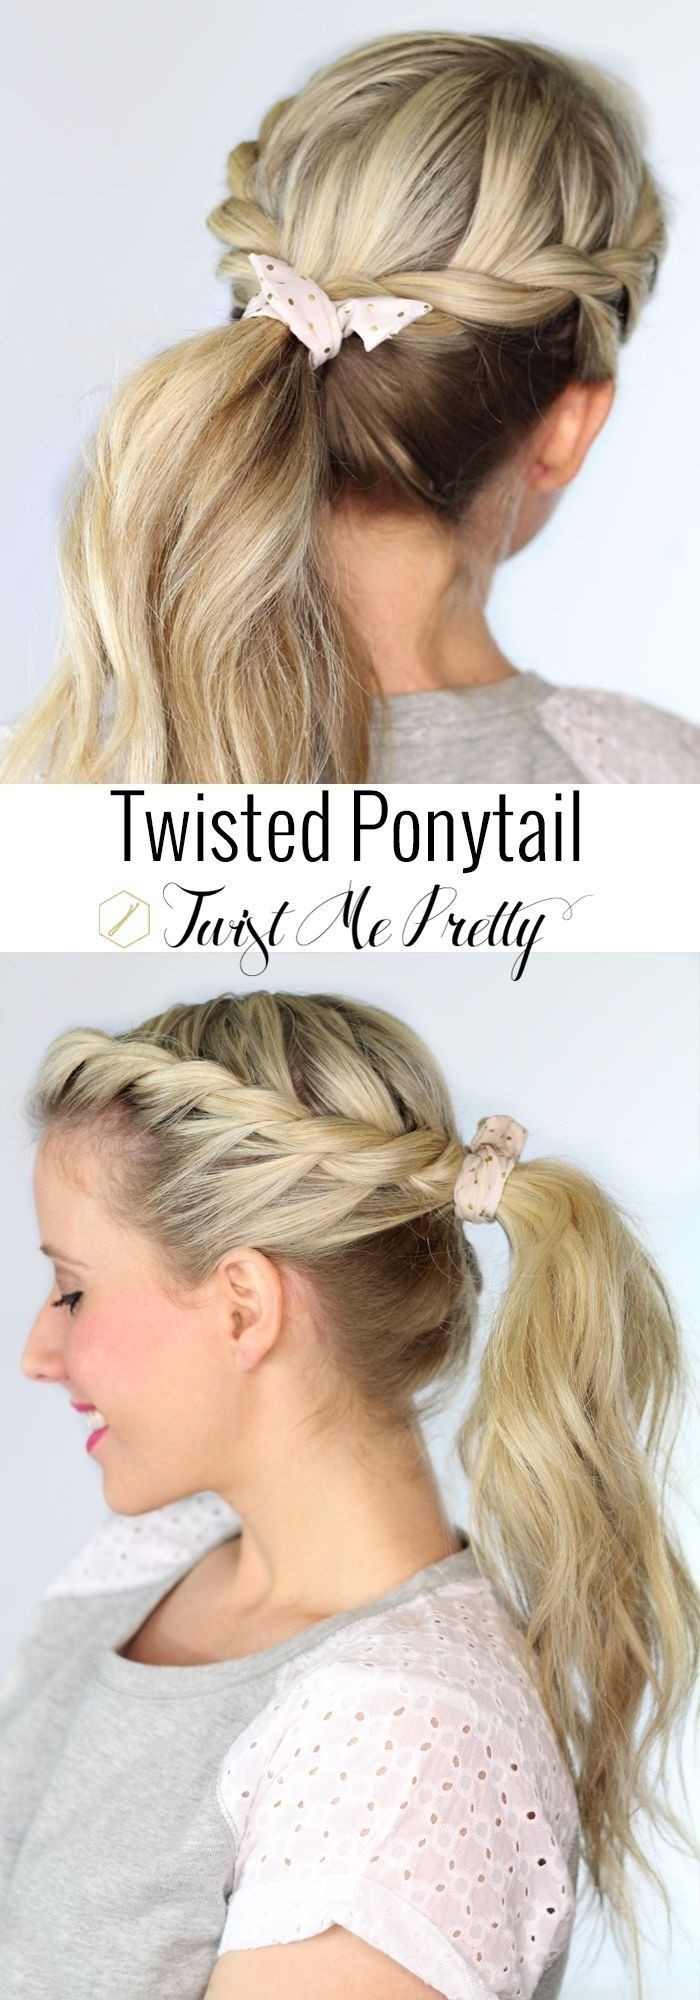 20 Ponytail Hairstyles: Discover Latest Ponytail Ideas Now ...